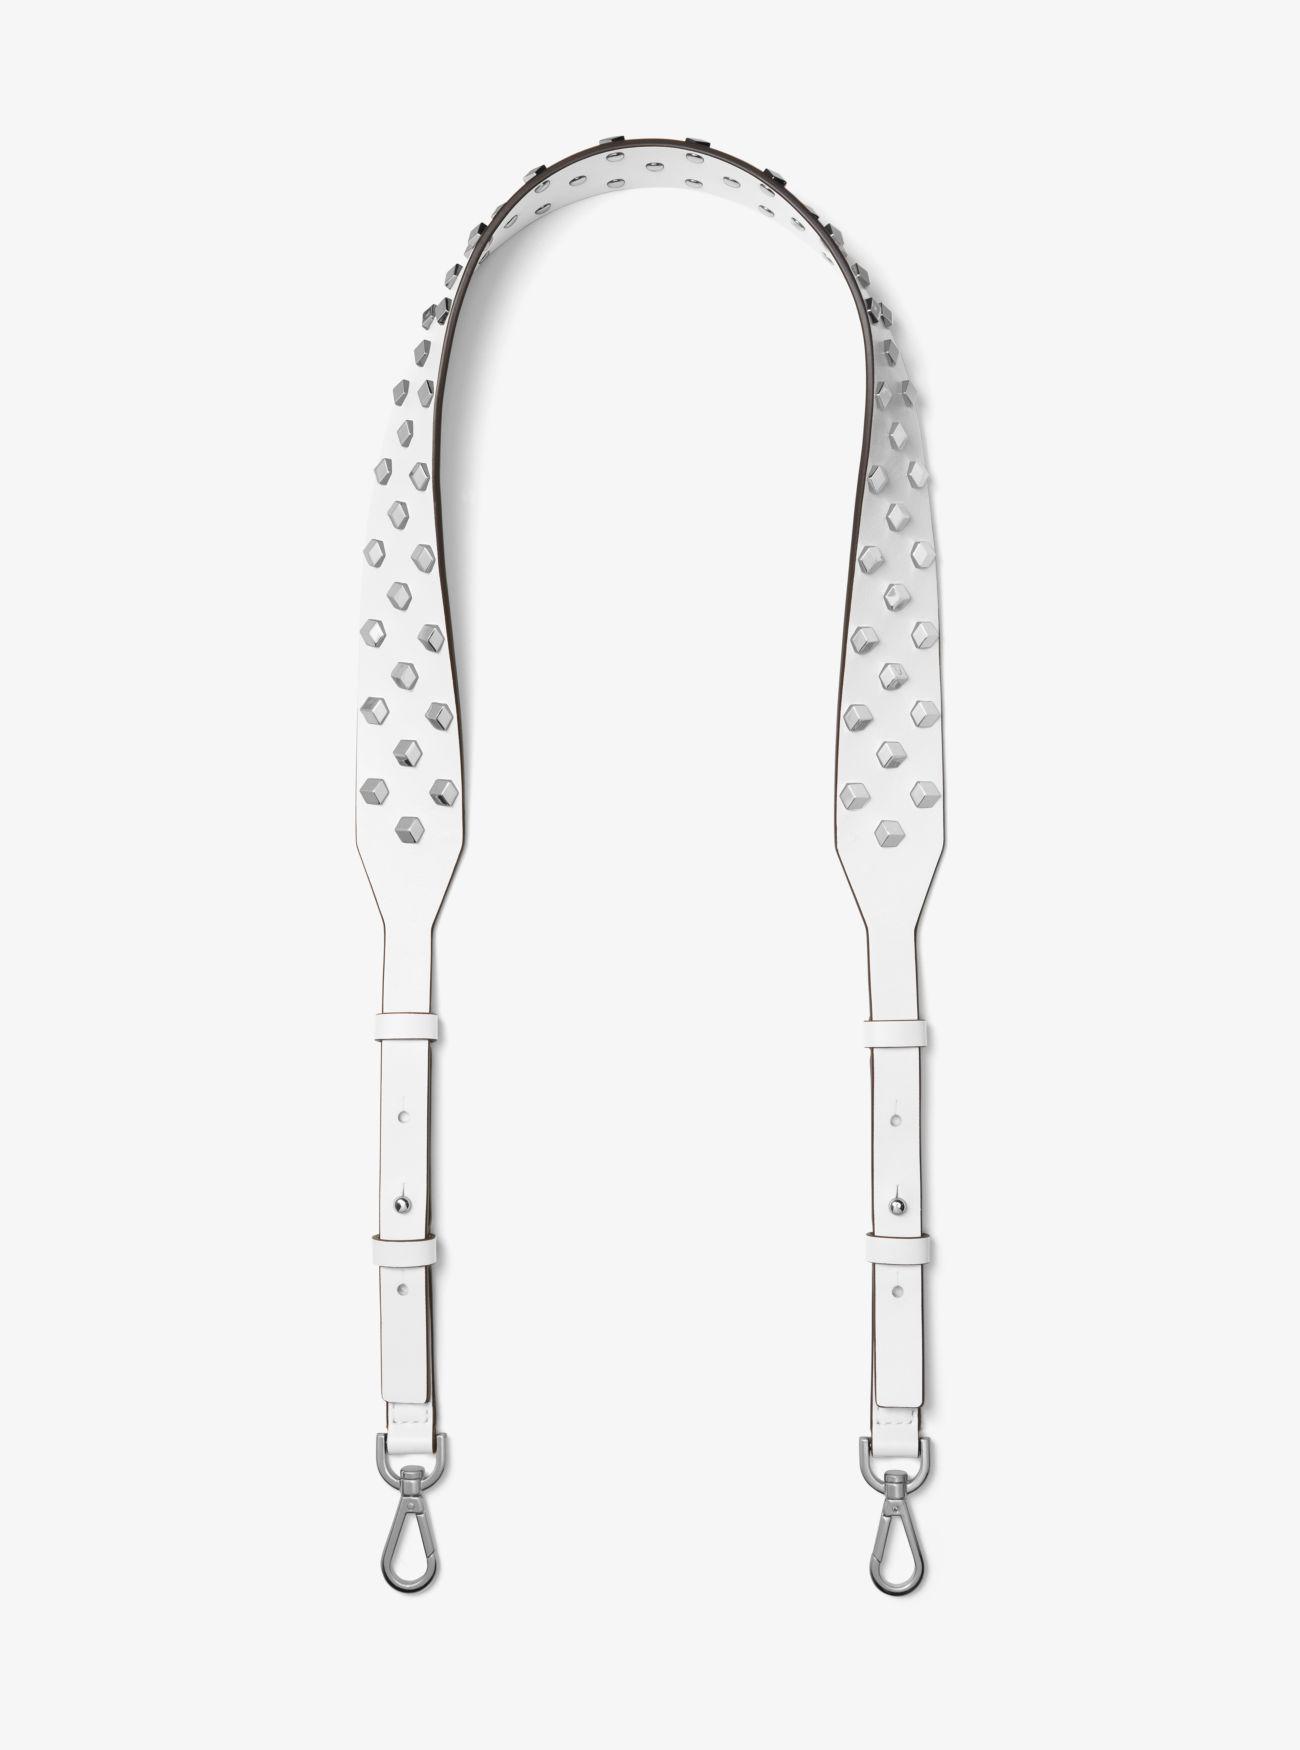 Michael Kors Studded Leather Shoulder Strap in White - Lyst